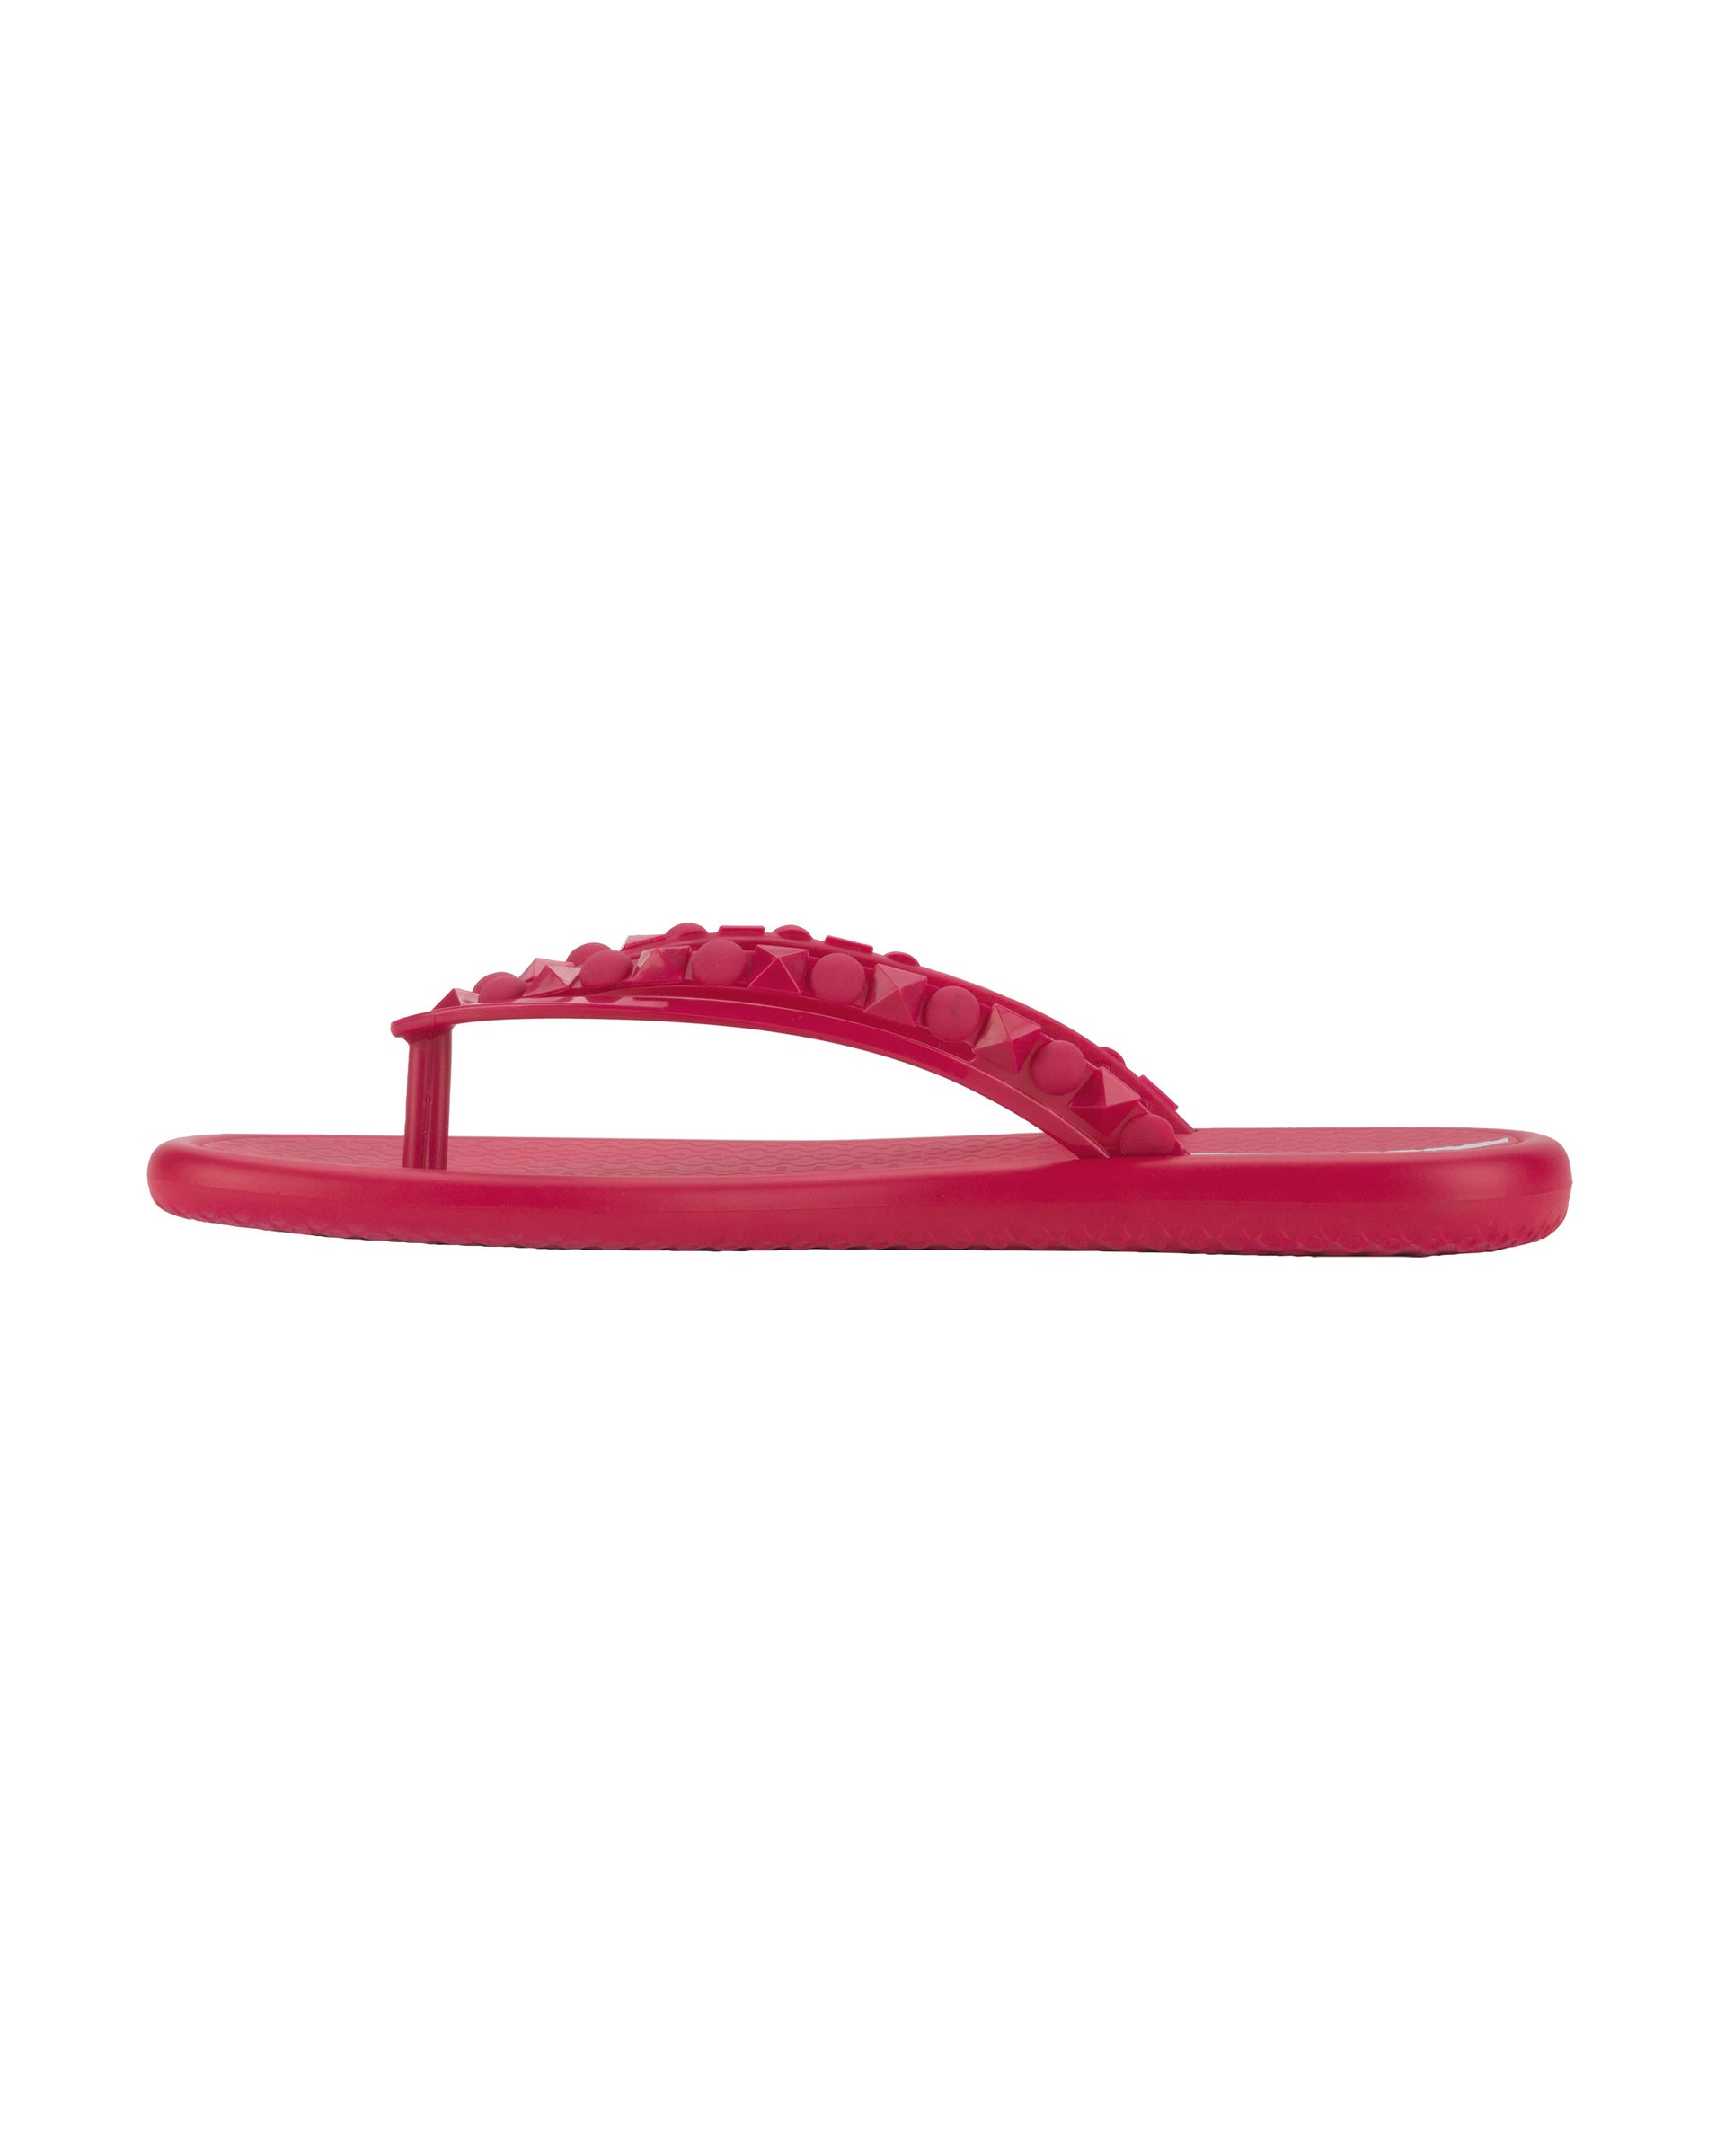 Side view of a dark pink Ipanema Meu Sol women's flip flop with stud details on strap.